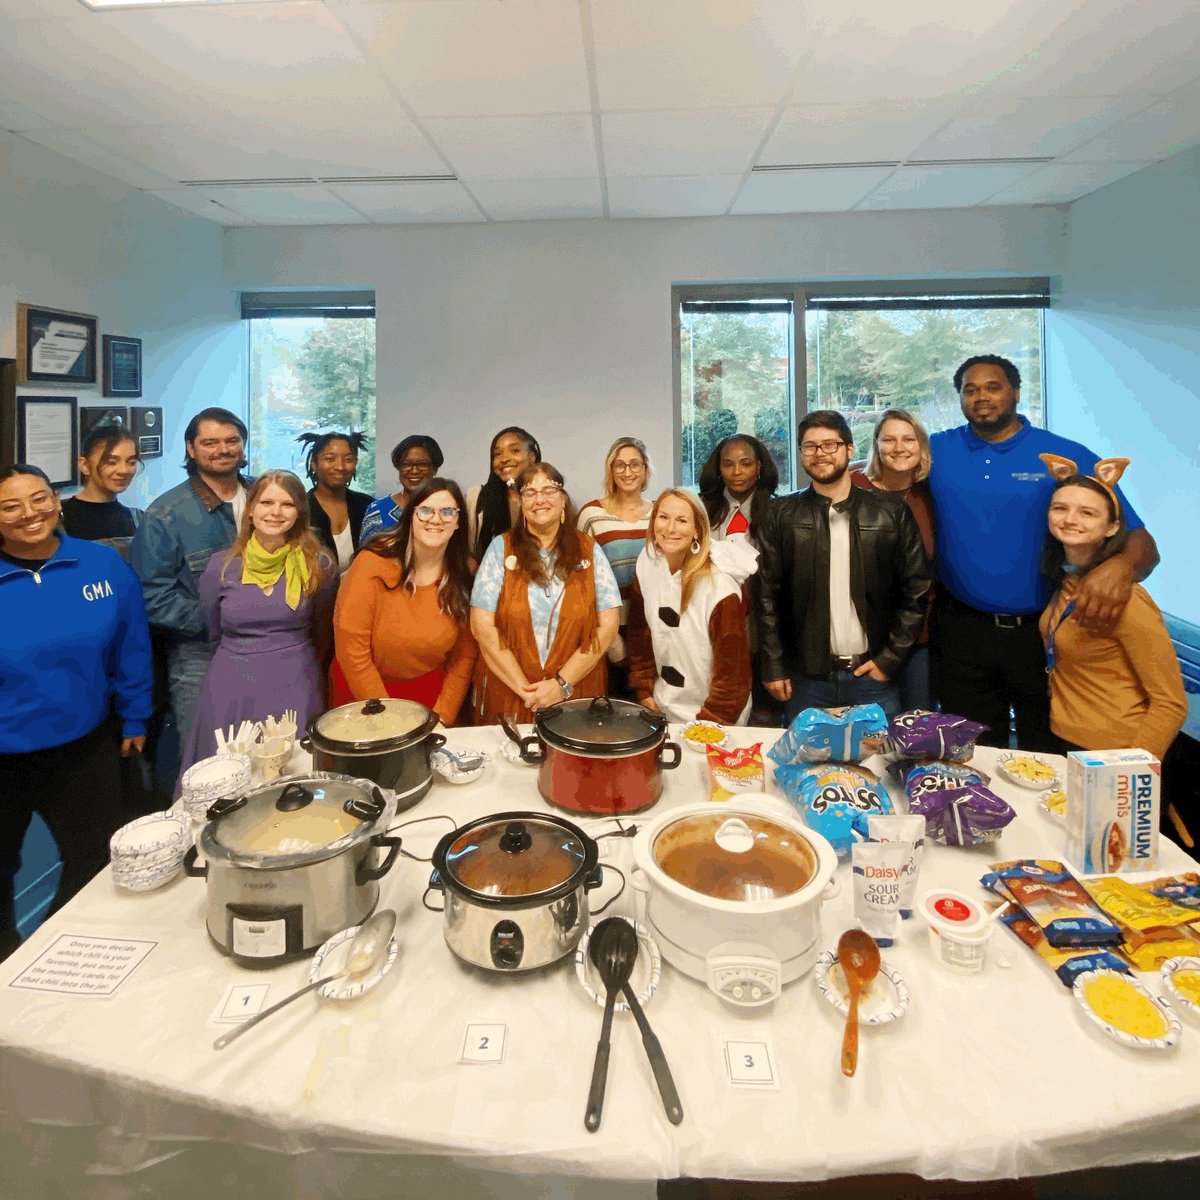 Fall is finally here! We're kicking off November with a Chili Cookoff in the office for Halloween! 

#gma #rva #richmondva #rvacommunity #vbva #virginia #rvabusiness #fallinva #rvafall #virginiabeach #norfolkva #tidewater